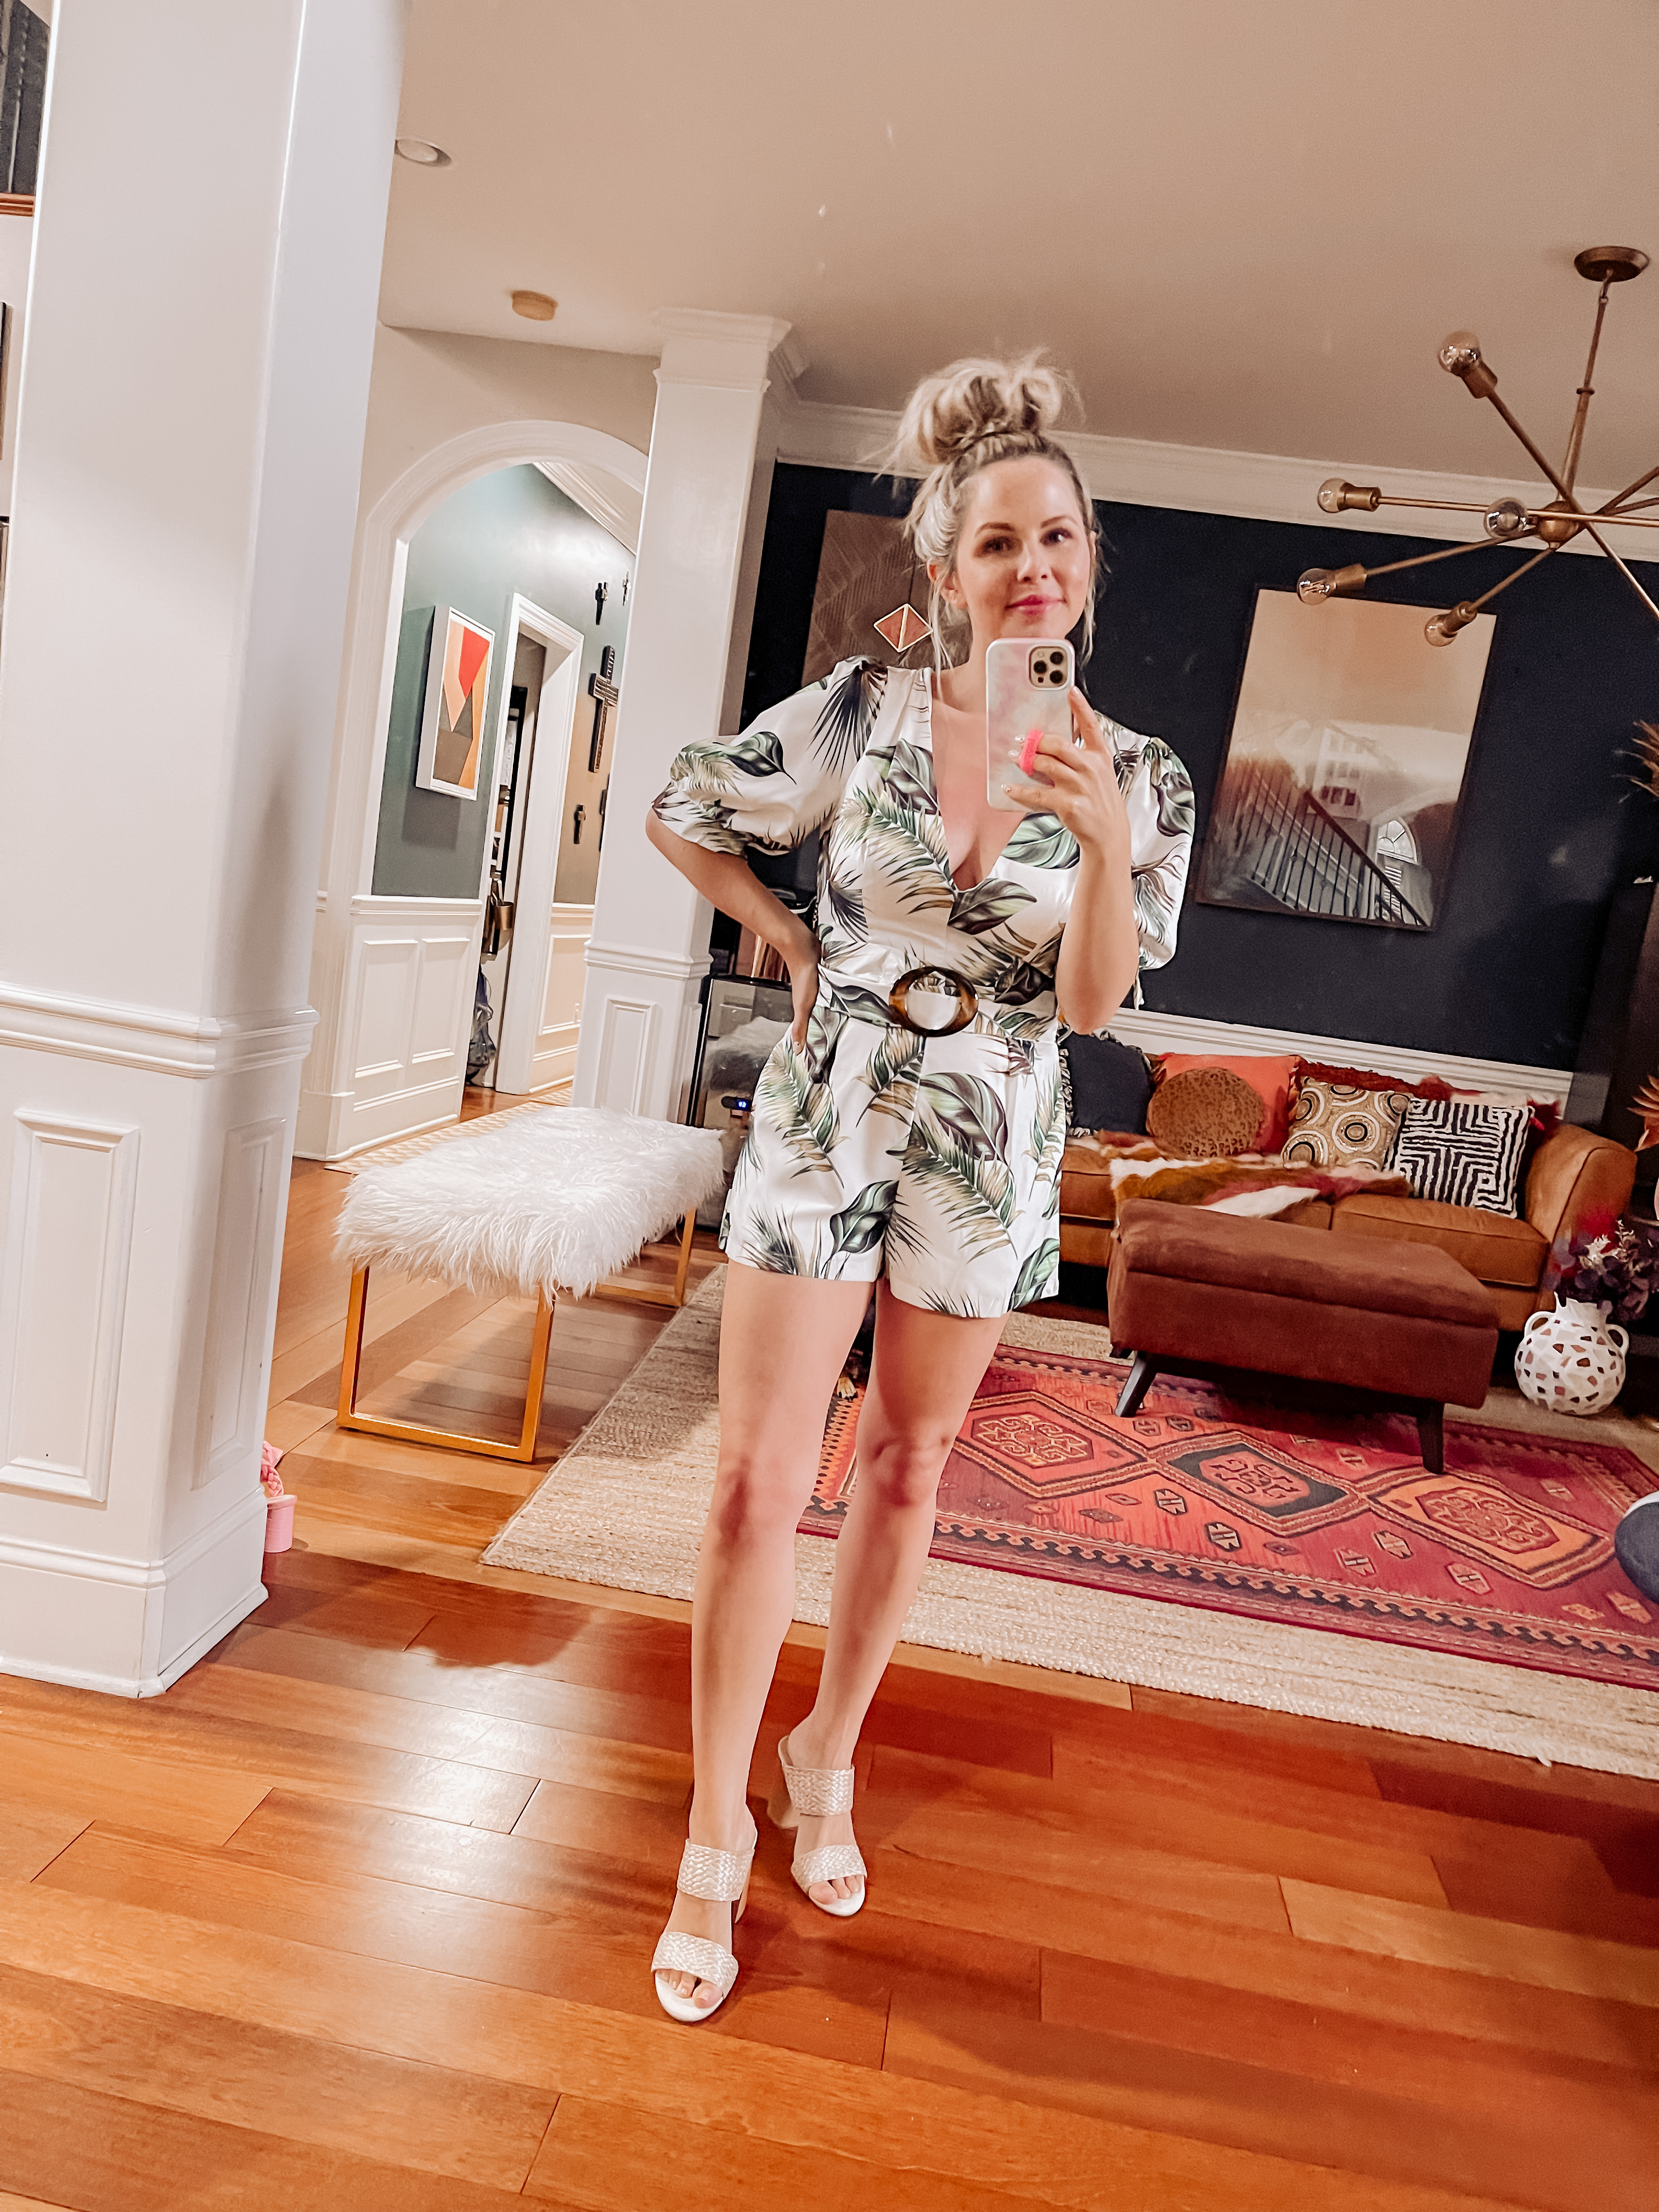 Top Nashville Lifestyle blogger, Nashville Wifestyles shares her Top Outfits to Wear on a Cruise Vacation! Click here to see her top picks!